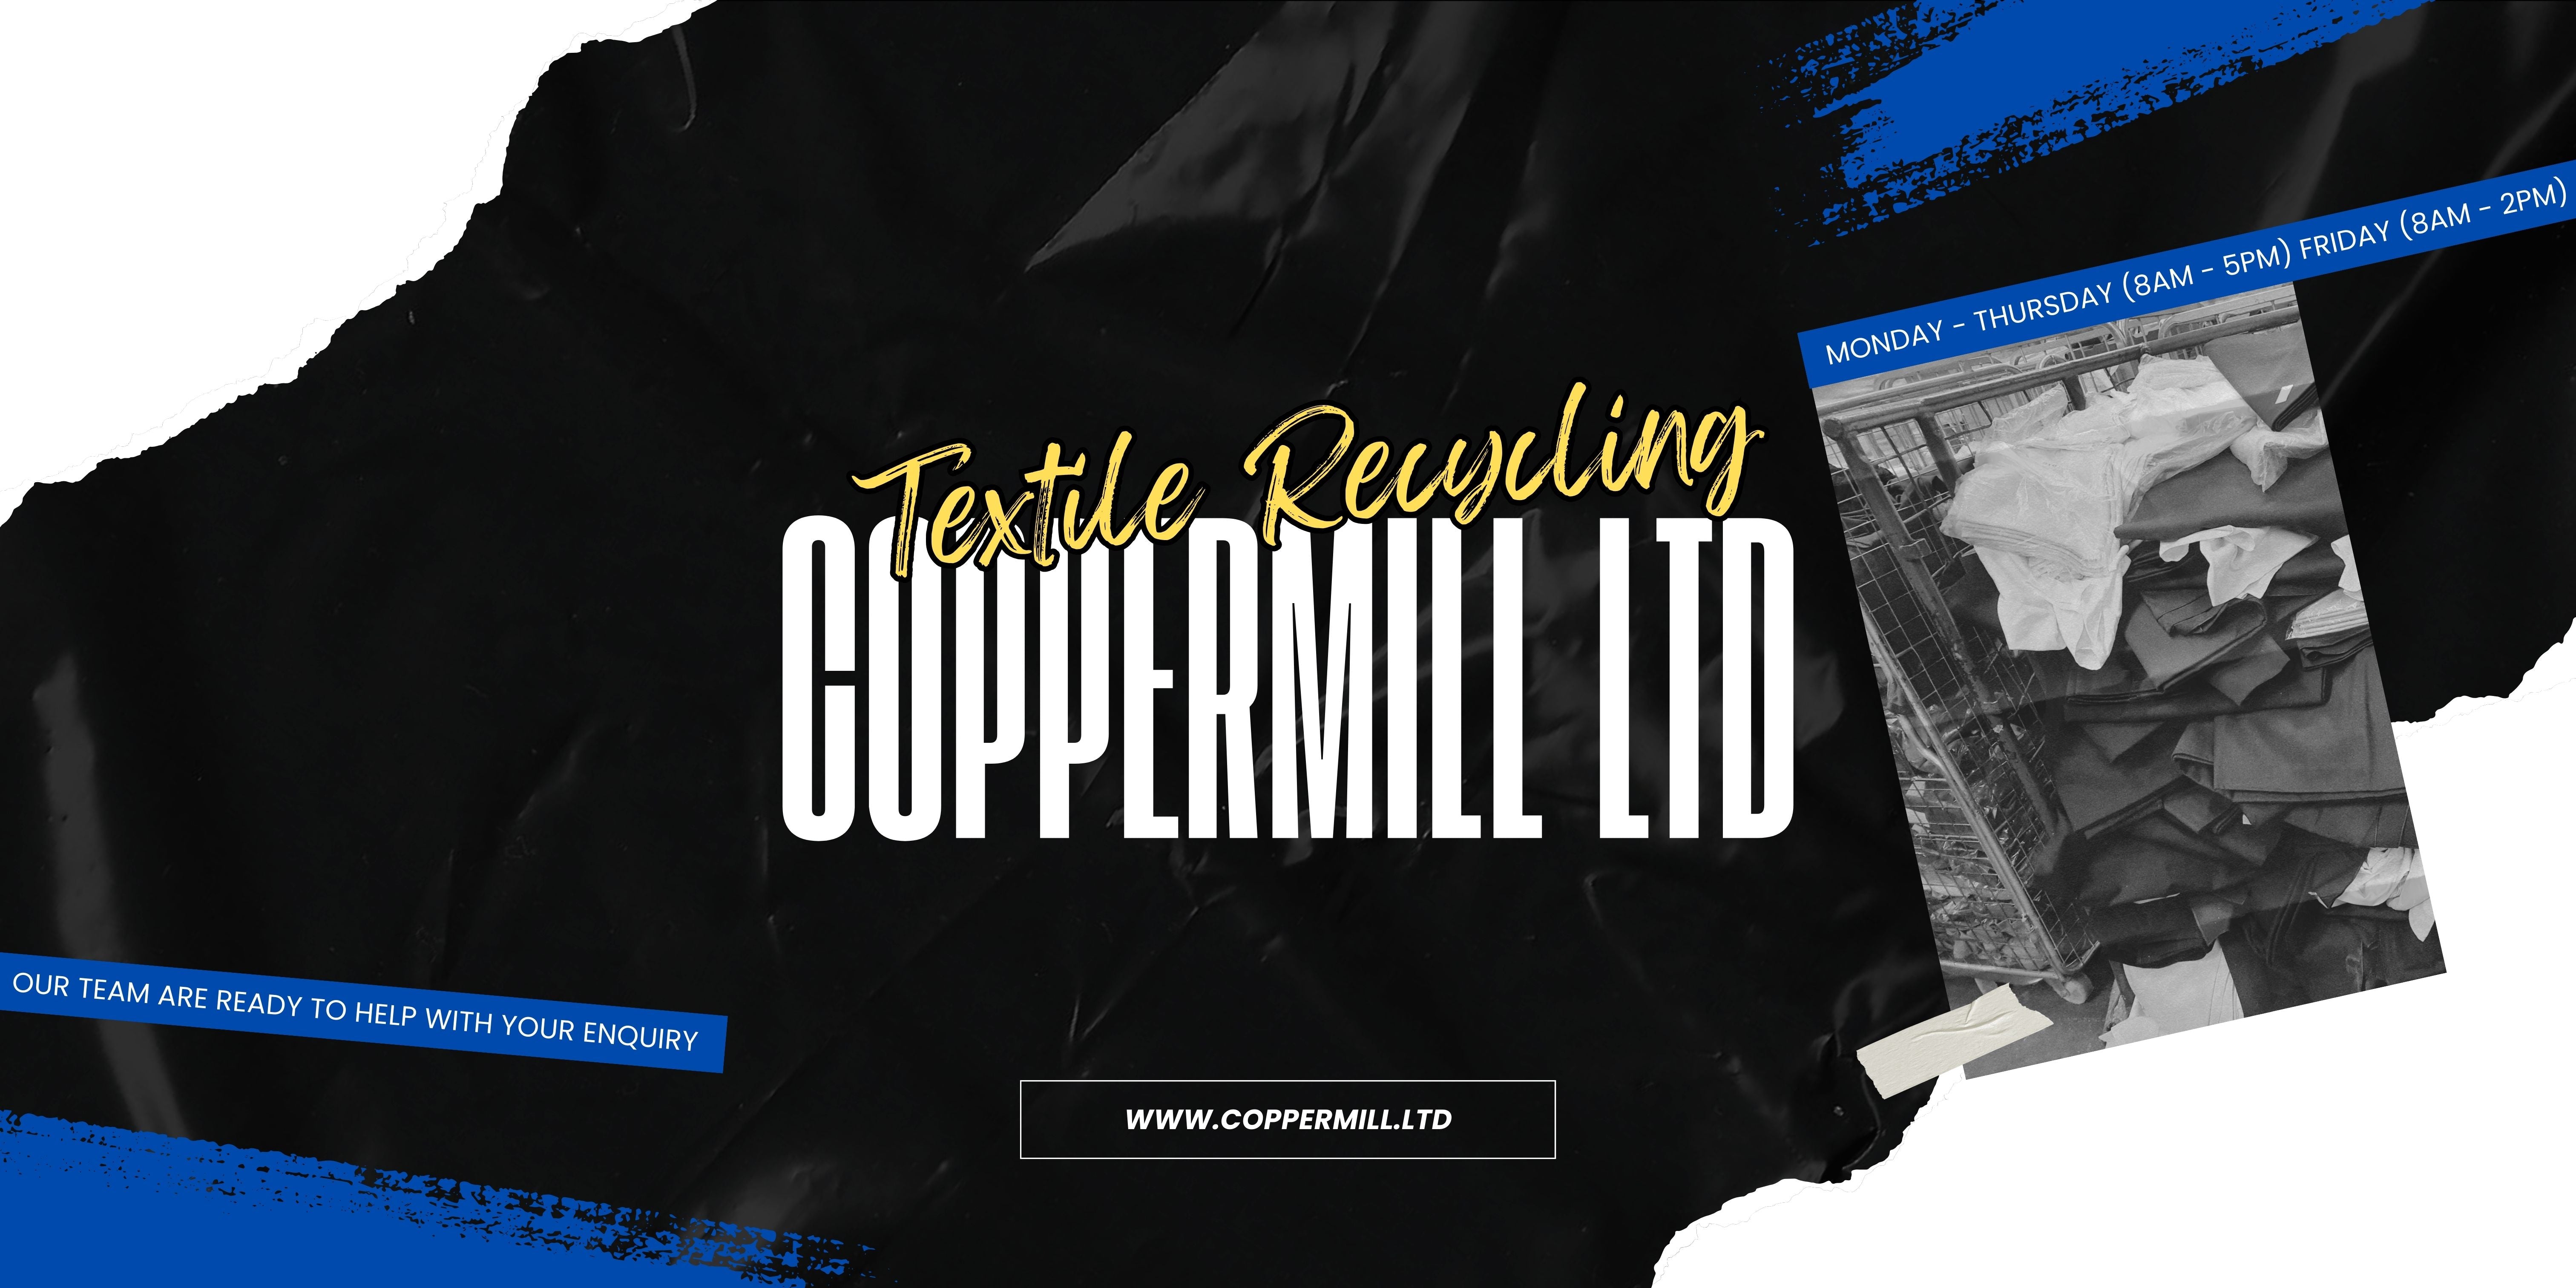 Coppermill Ltd Textile Recycling